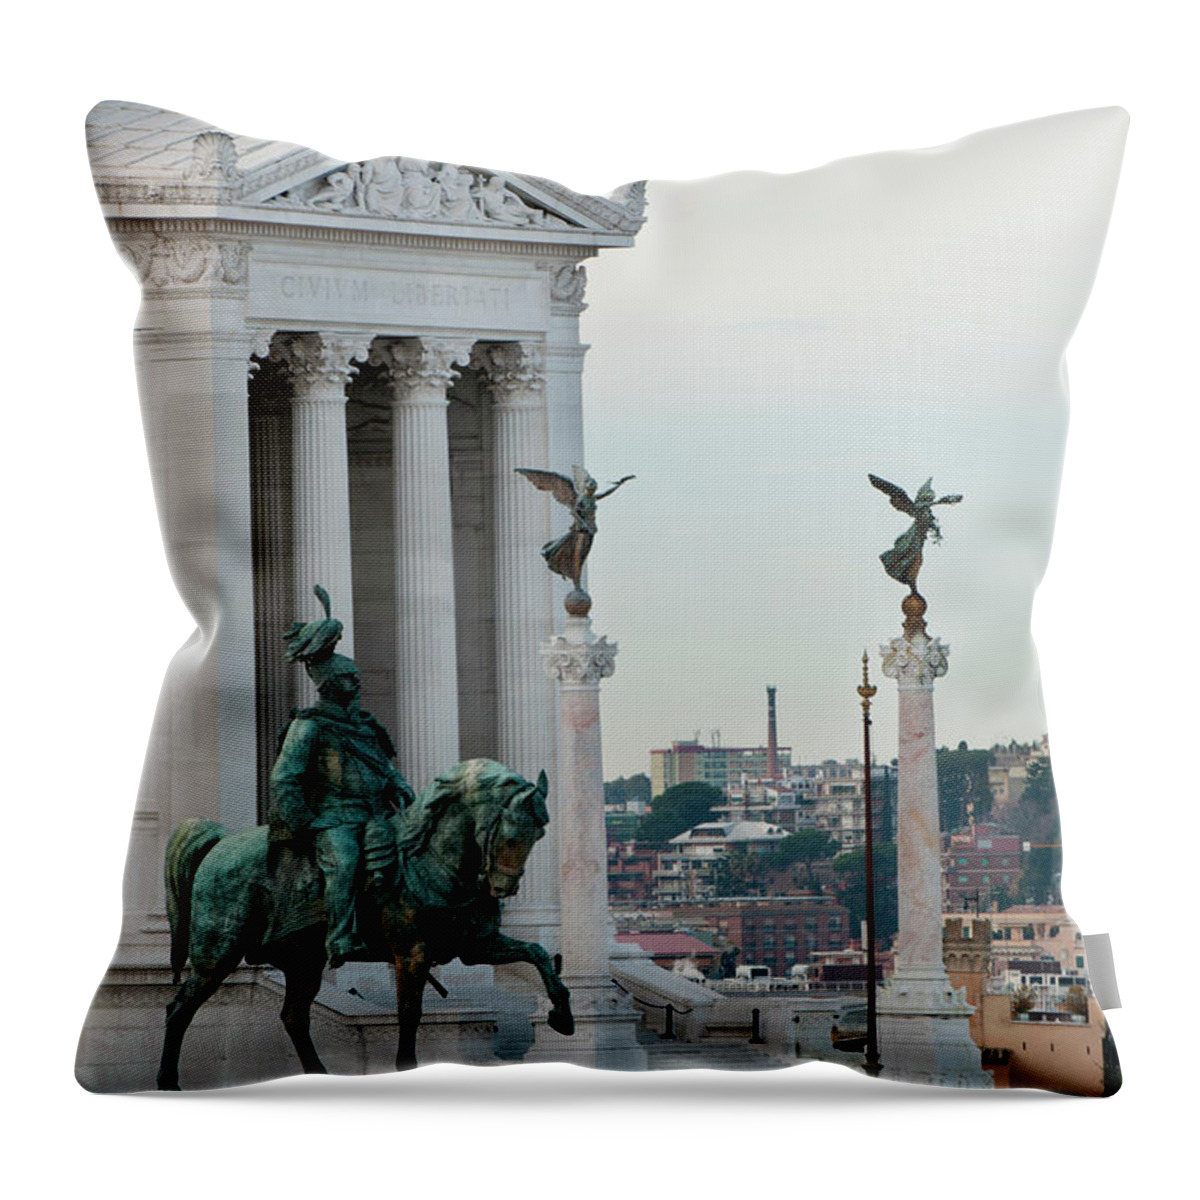 Horse Throw Pillow featuring the photograph The Statue Of Victor Emmanuel by Driendl Group